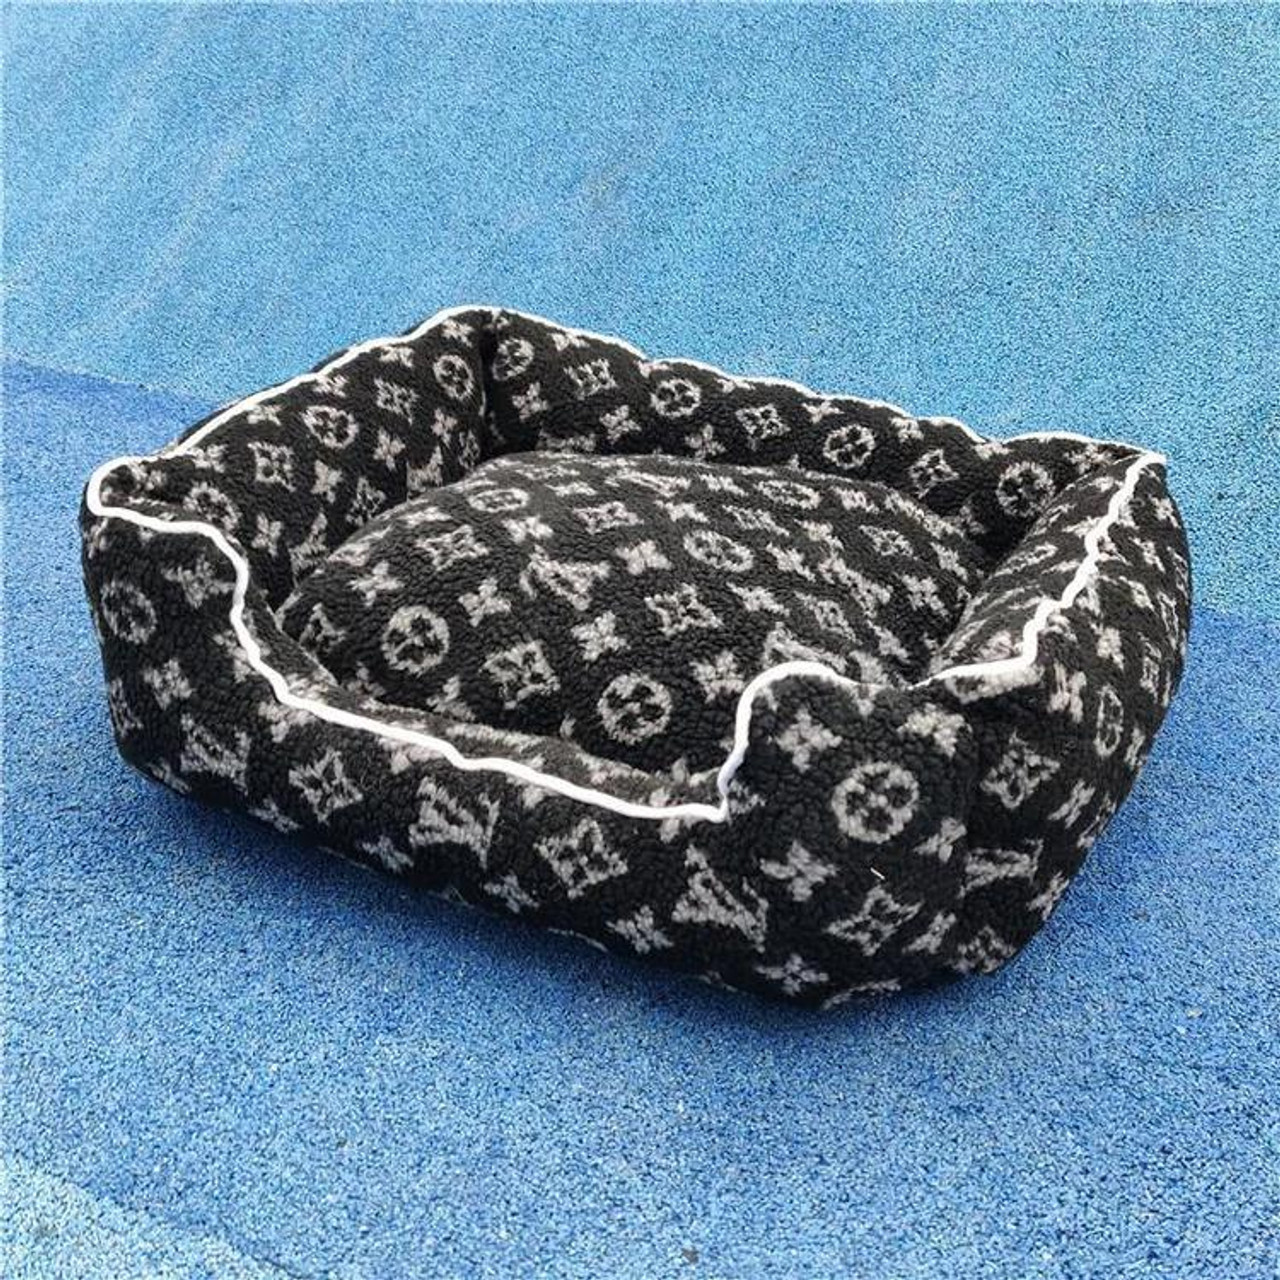 Chewy Vuitton Black Fluffy Bed